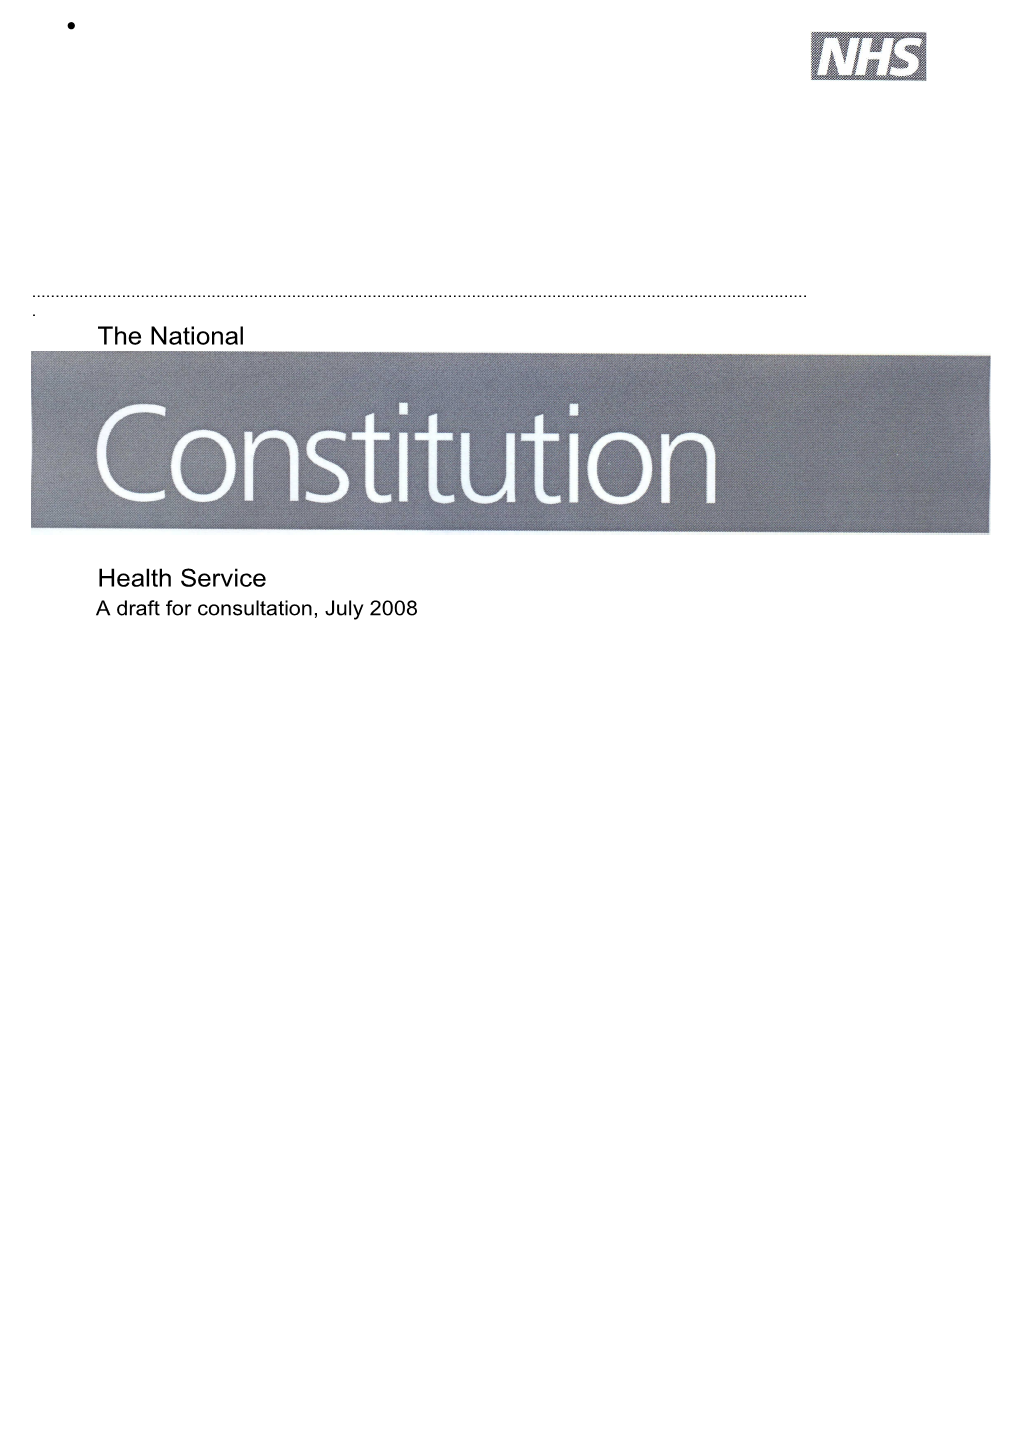 Appendix to the Nhs Constitution - a Consultation Document